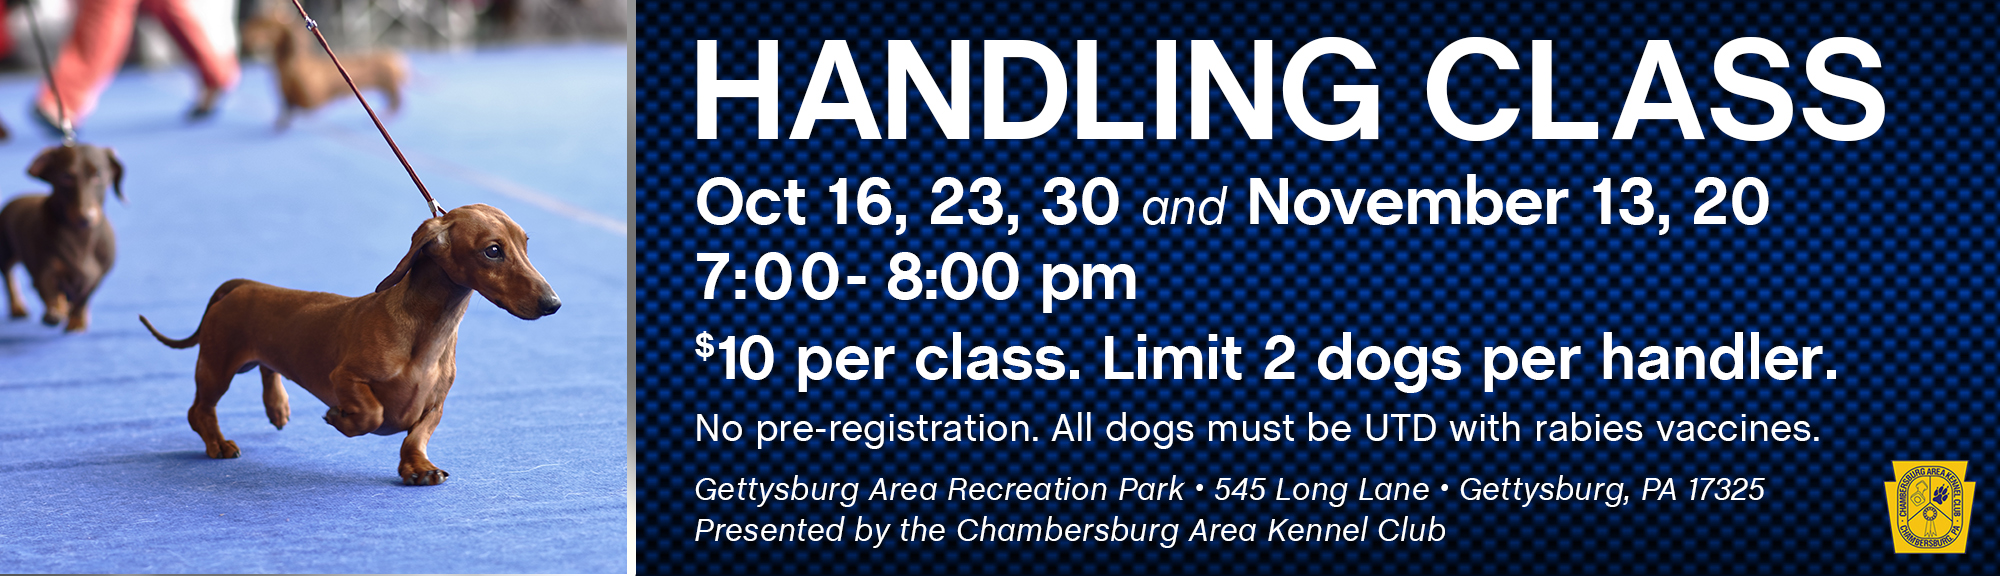 Handling Class Oct 16, 23, 30 and November 13, 20 - 7:00- 8:00 pm $10 per class. Limit 2 dogs per handler. No pre-registration. All dogs must be UTD with rabies vaccines. Gettysburg Area Recreation Park • 545 Long Lane • Gettysburg, PA 17325 Presented by the Chambersburg Area Kennel Club